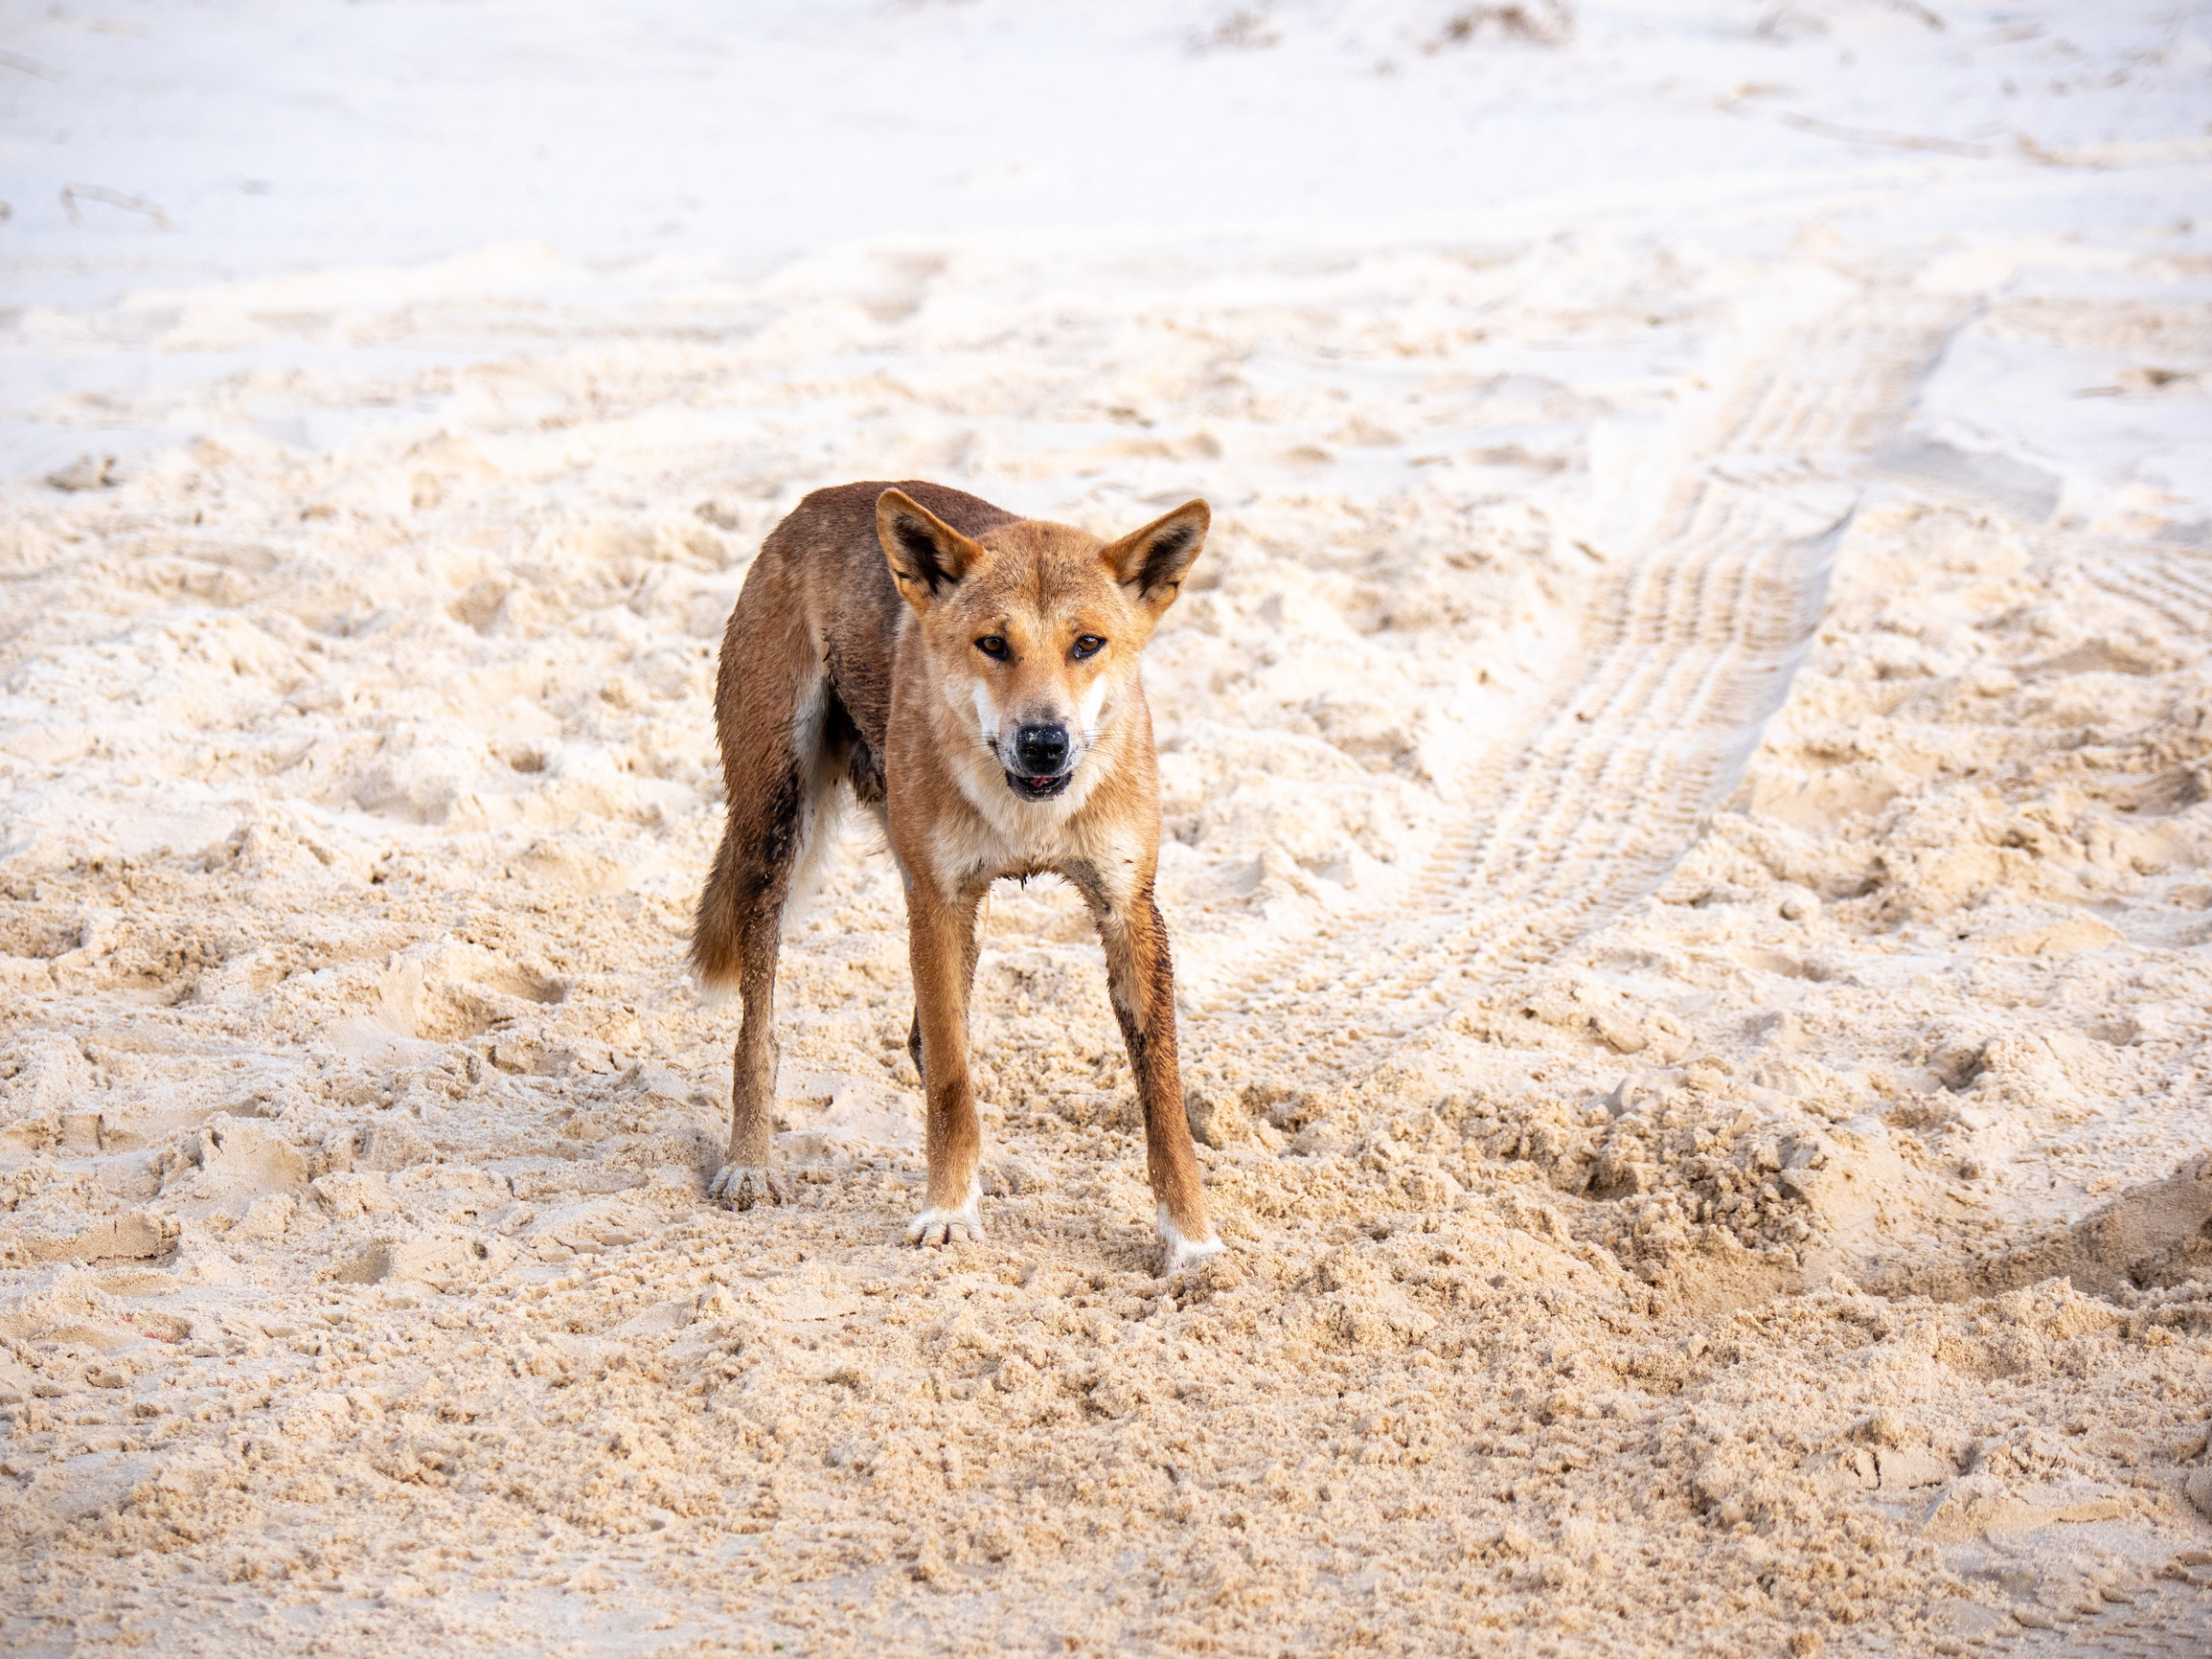 Fascinating Facts About Dingoes on Fraser Island | Queensland